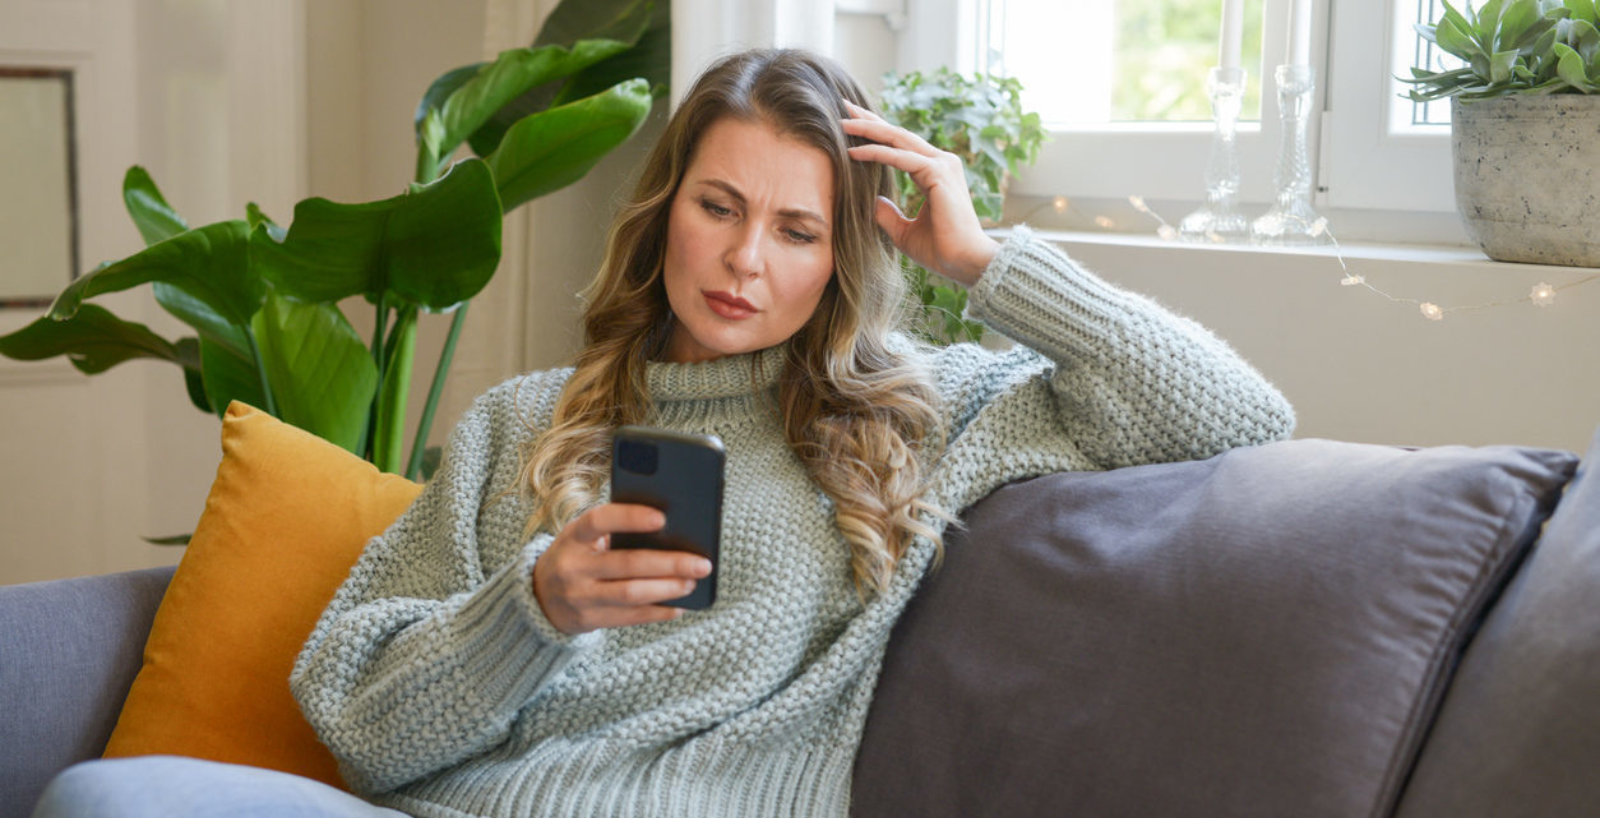 Woman sitting on a sofa looking at her phone